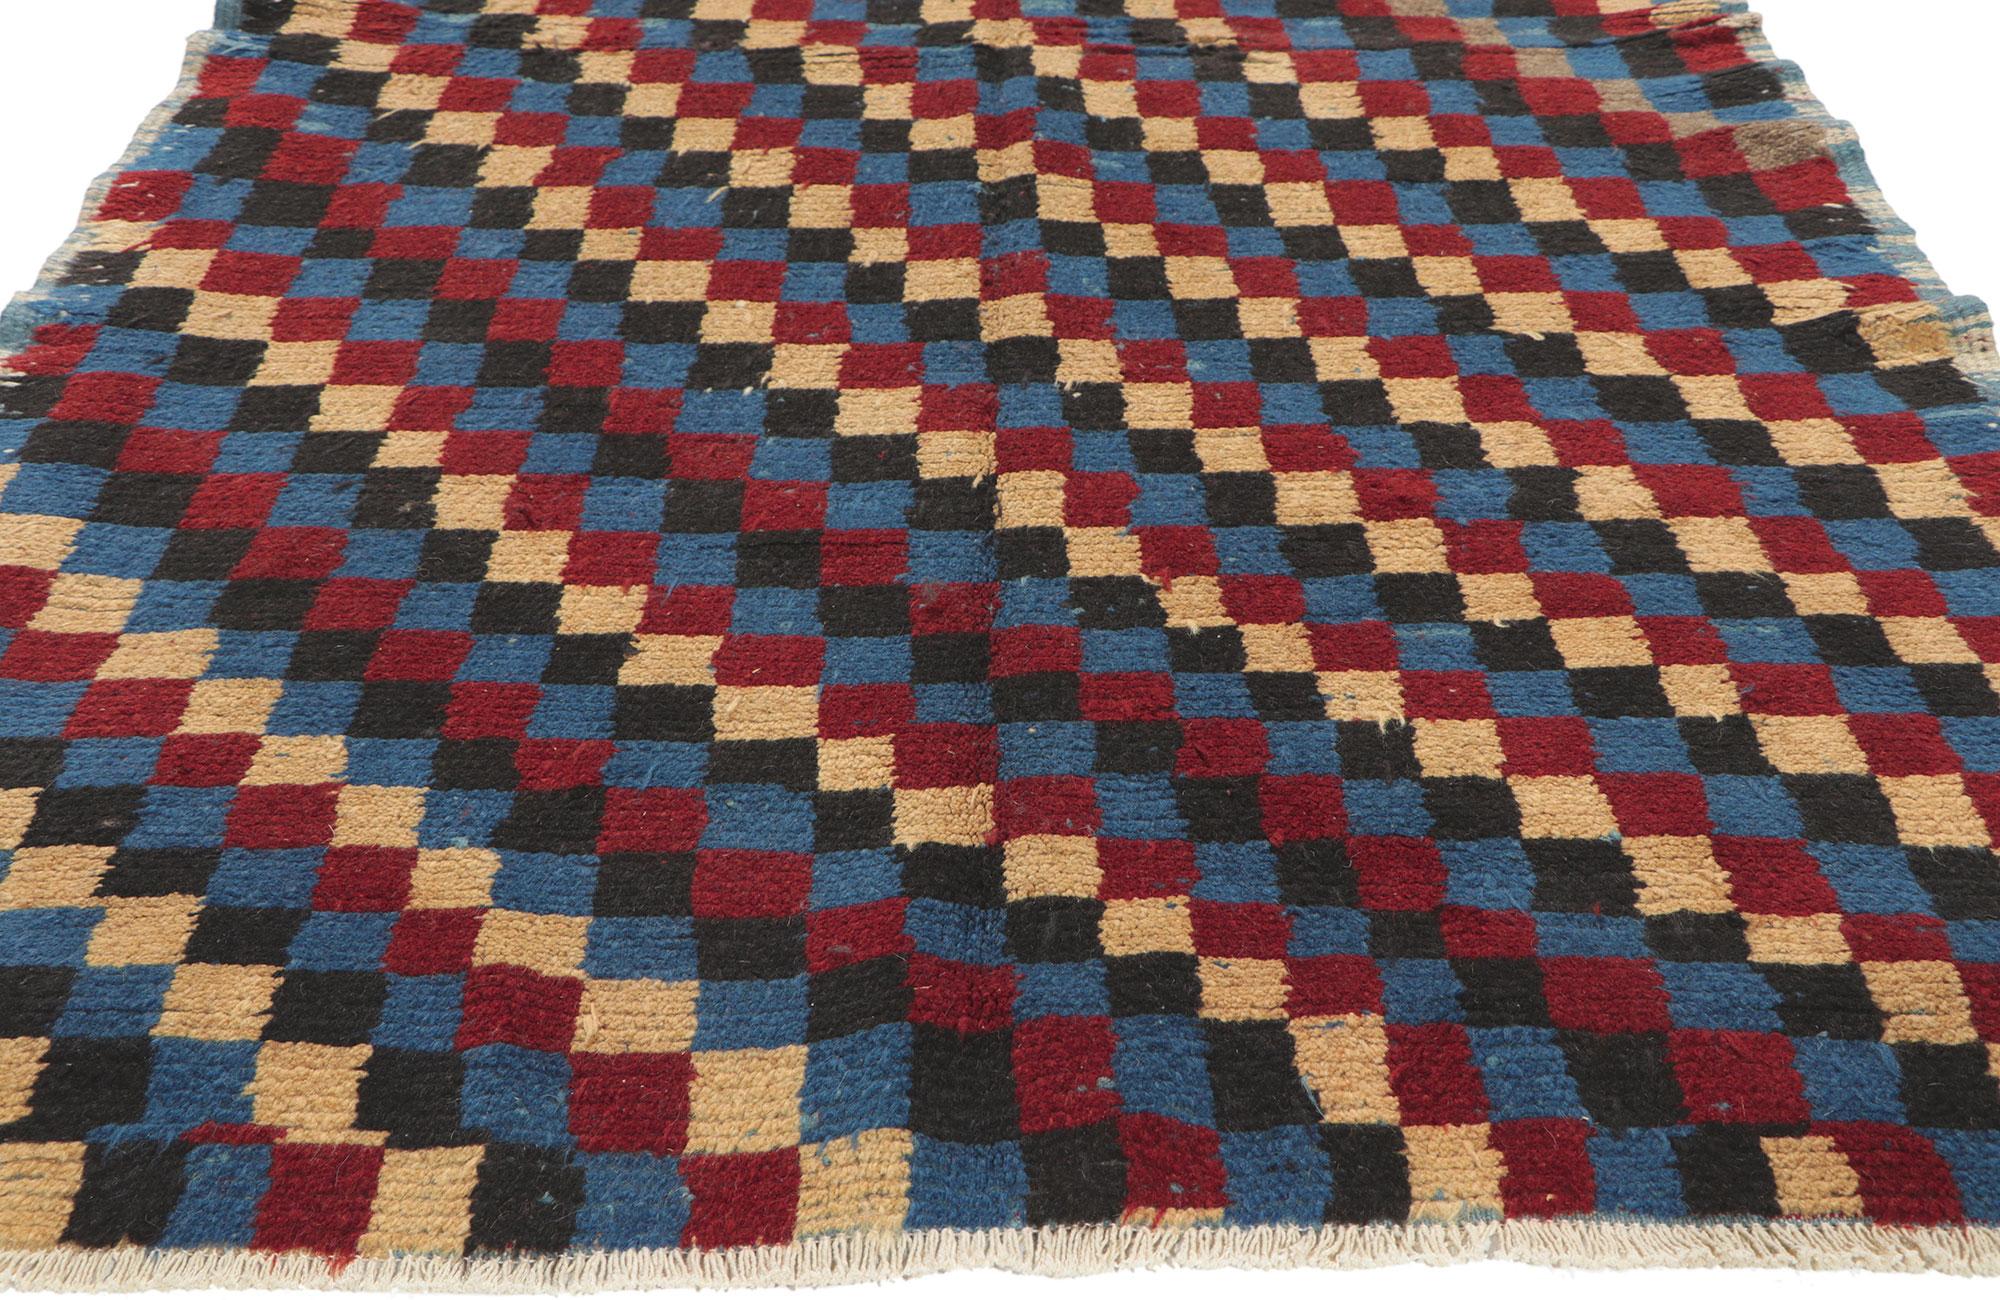 Vintage Turkish Tulu Bauhaus Rug with Checkerboard Pattern In Good Condition For Sale In Dallas, TX